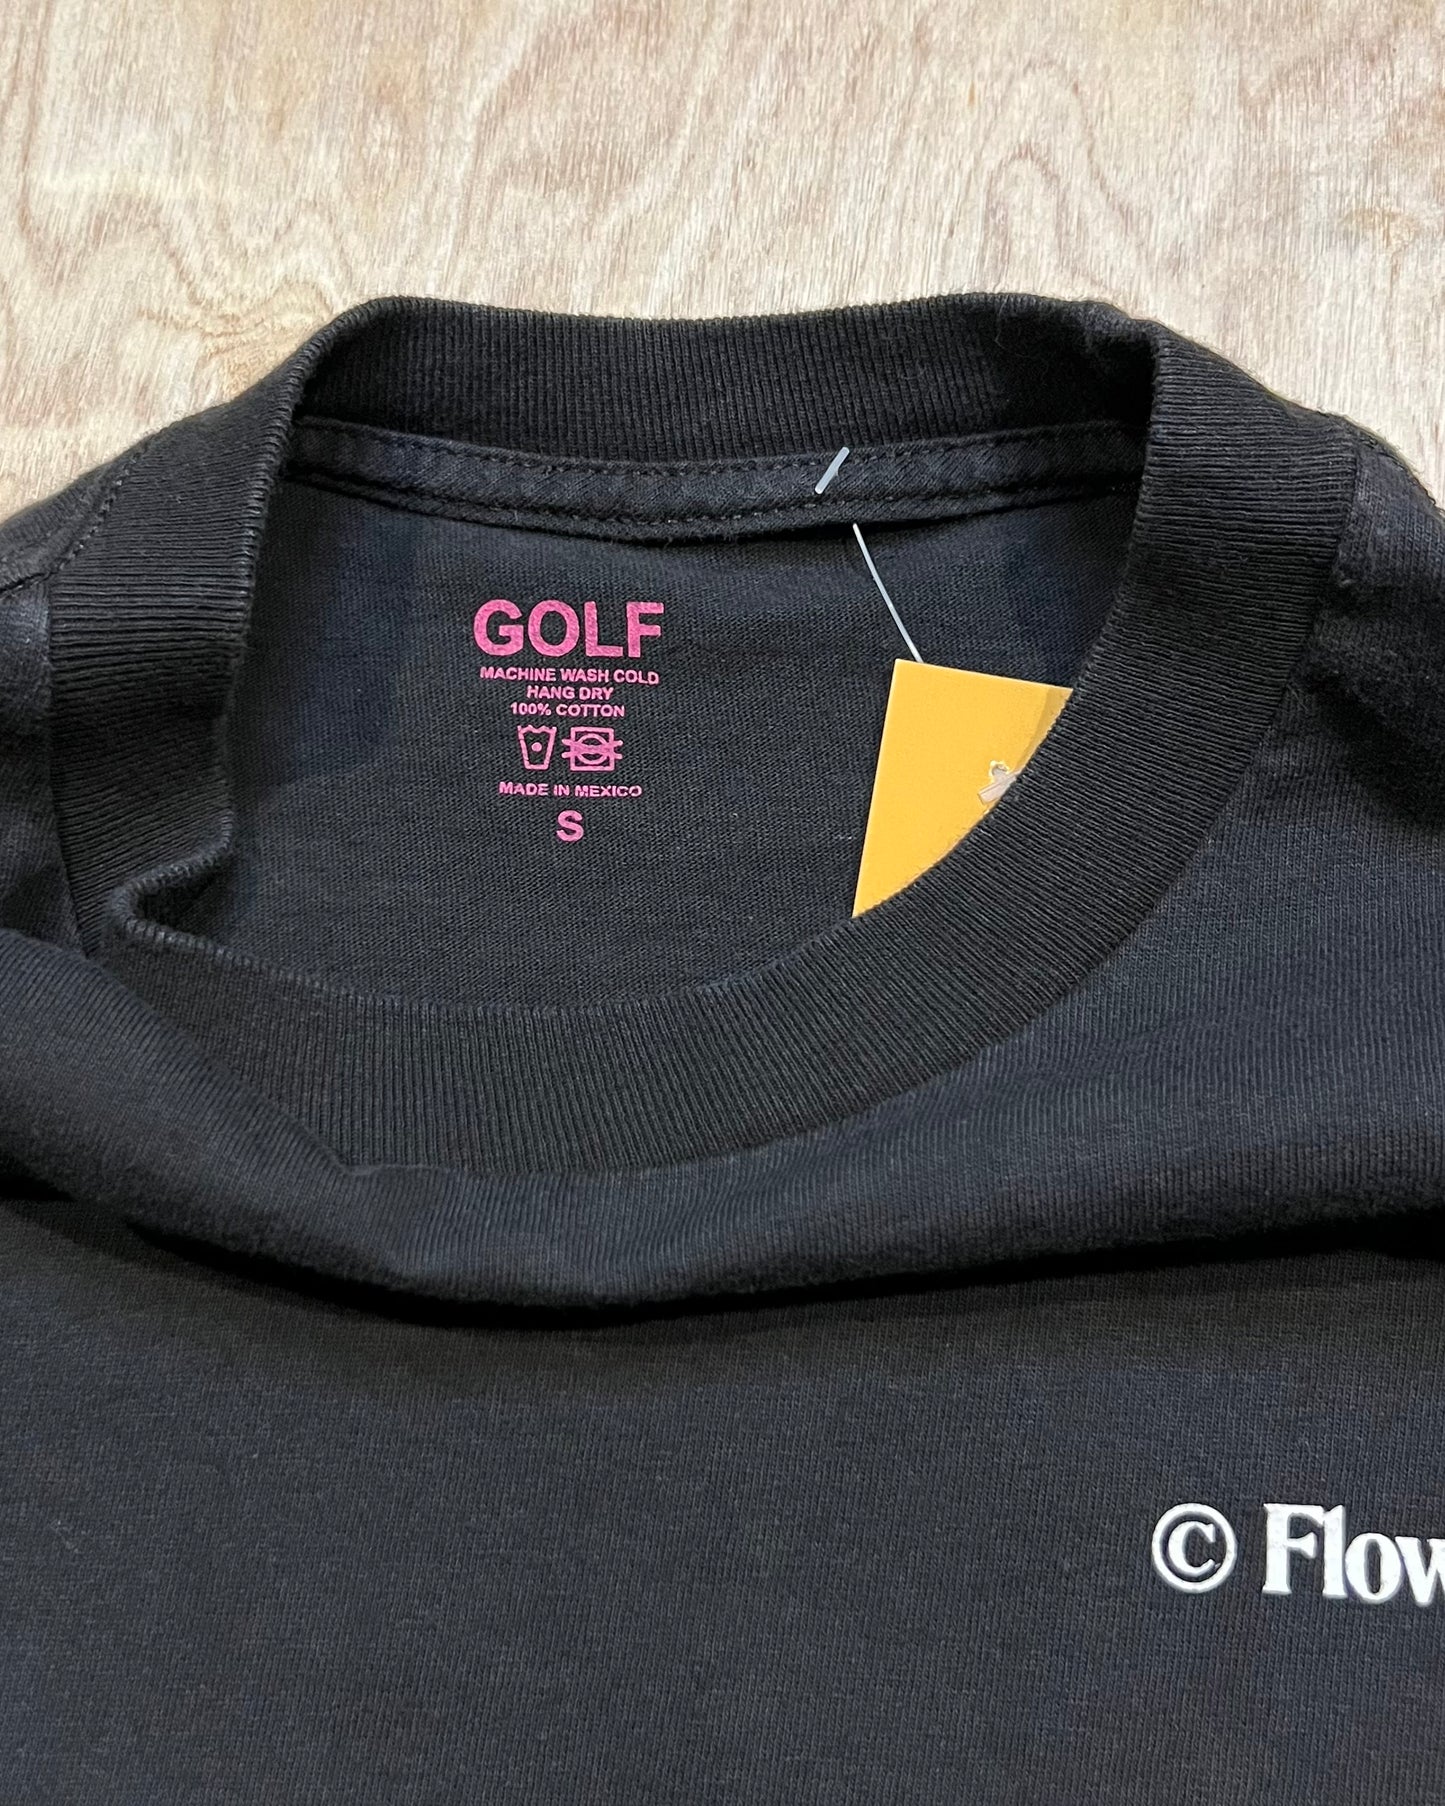 Golf Limited Edition Flower Boy: Save the Bees T-Shirt